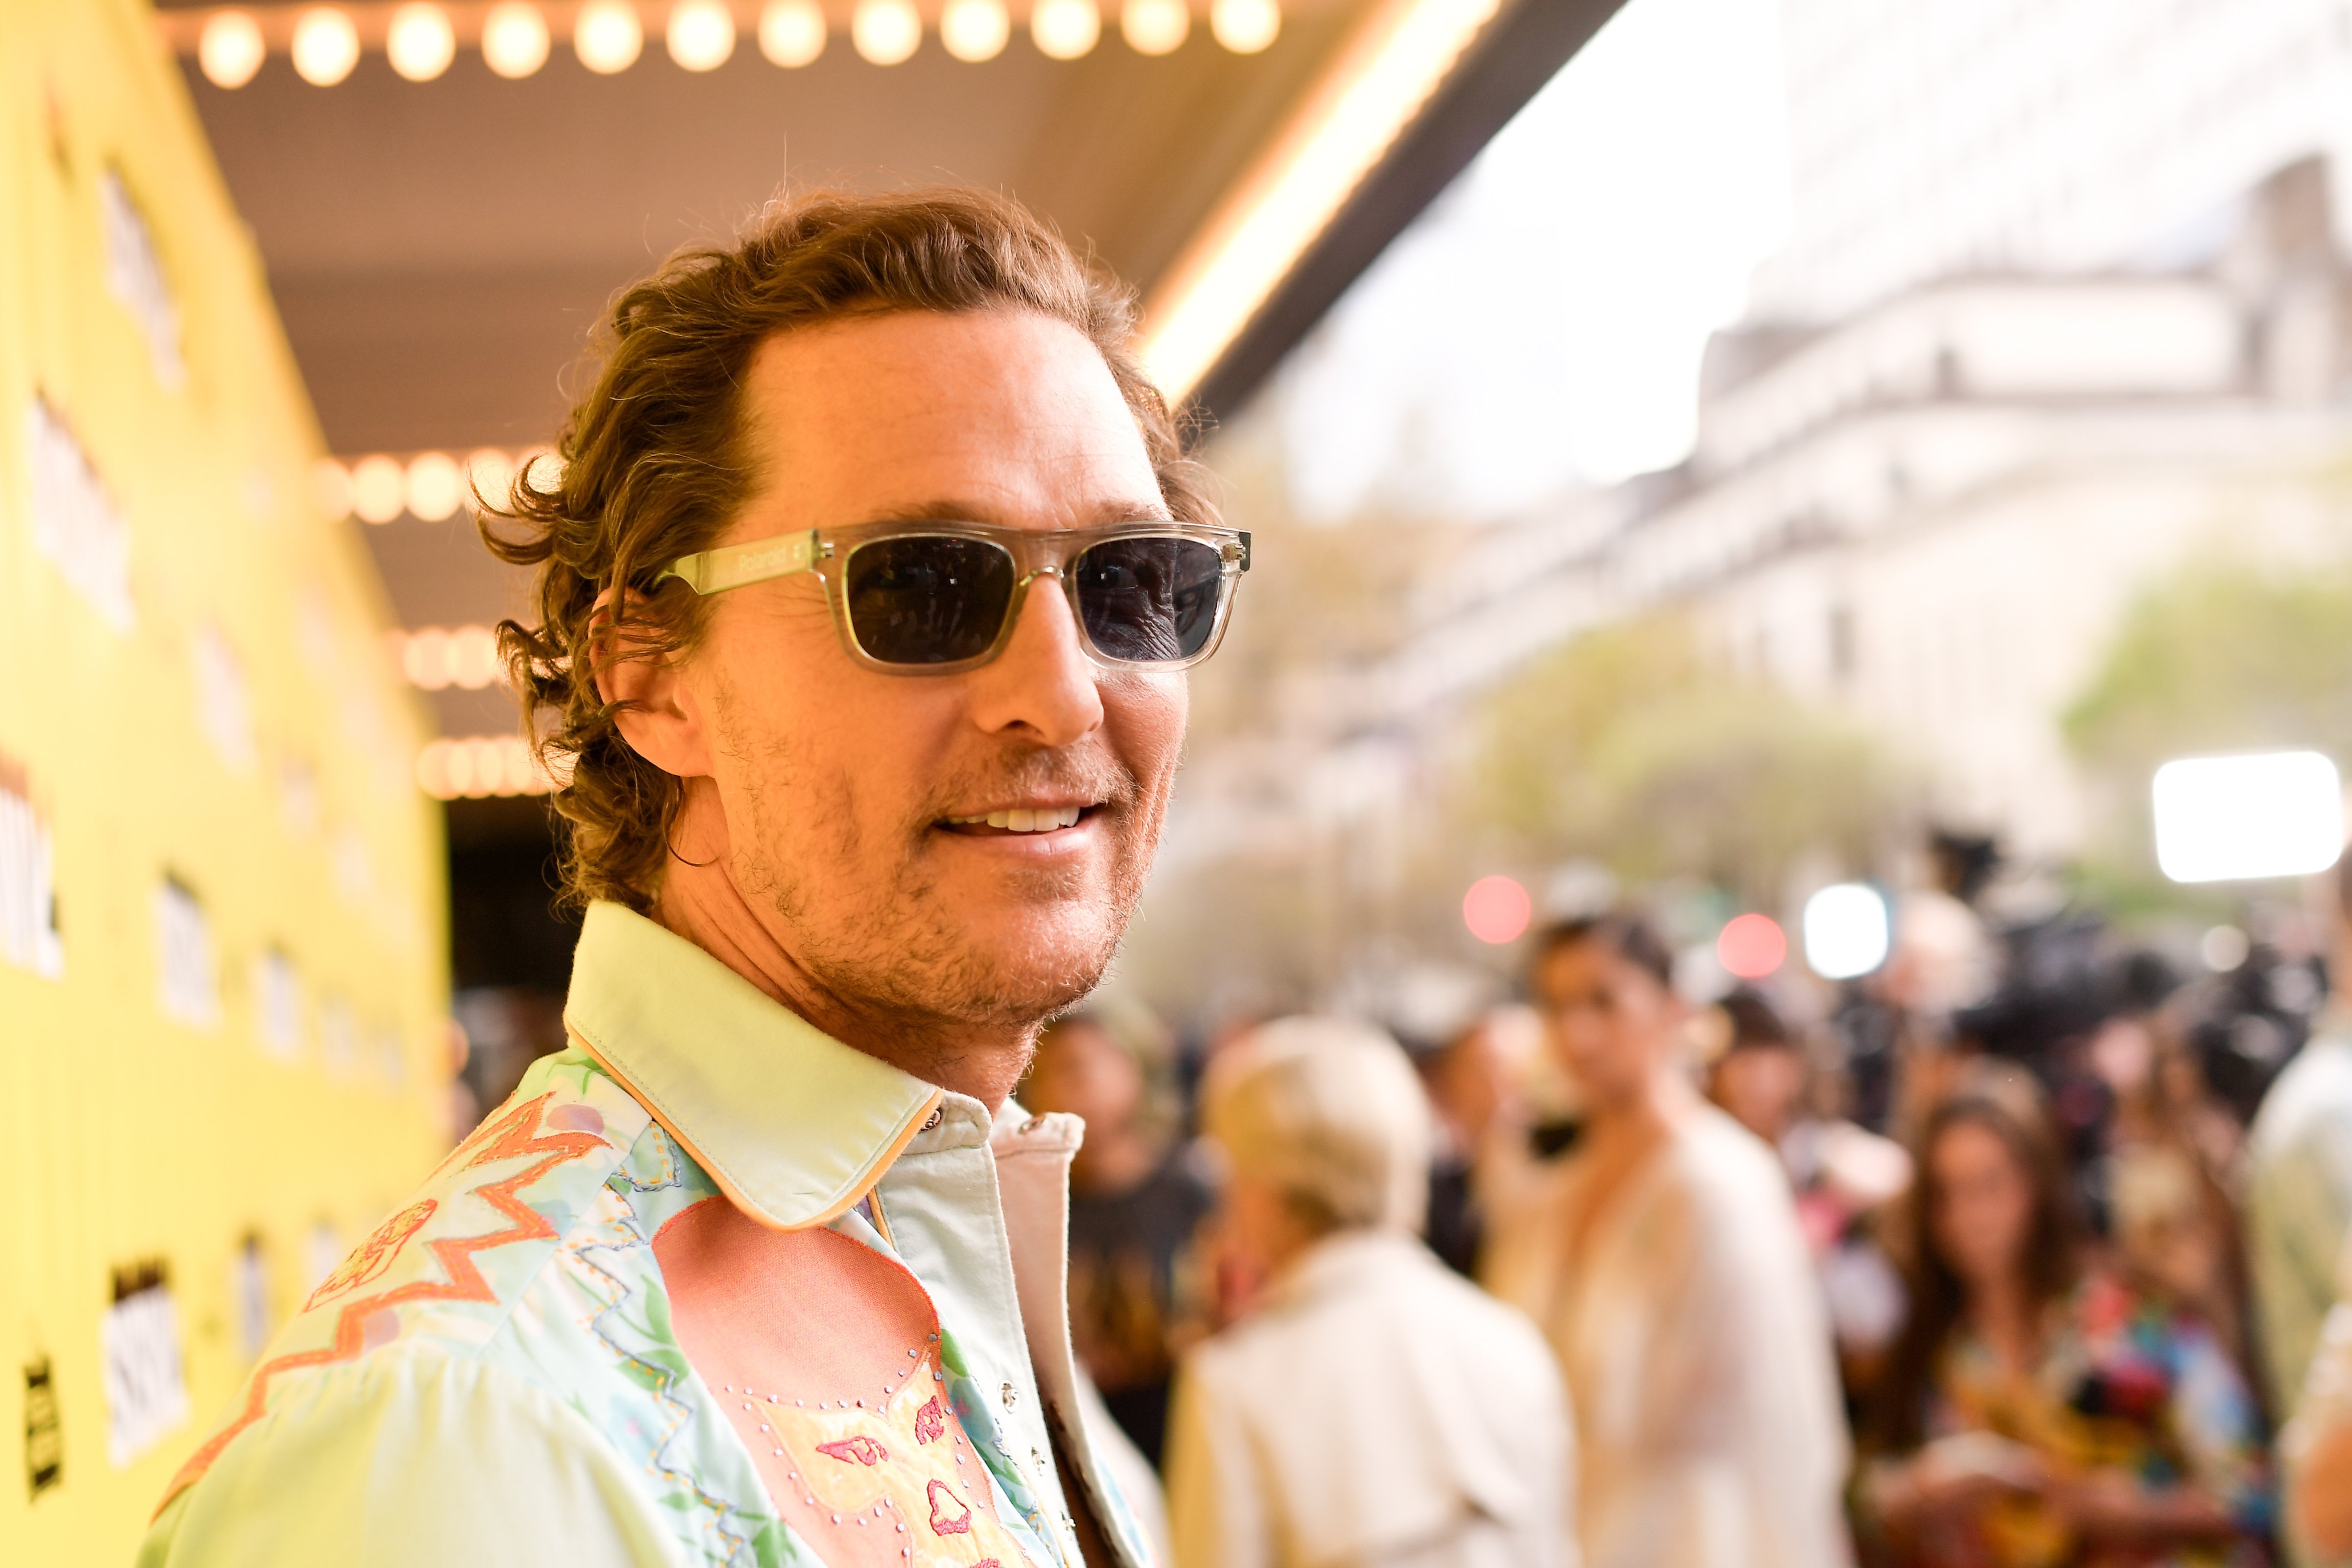 Matthew McConaughey attends the "The Beach Bum" Premiere 2019 SXSW Conference and Festivals at Paramount Theatre on March 09, 2019 in Austin, Texas. (Matt Winkelmeyer&mdash;SXSW/Getty Images)